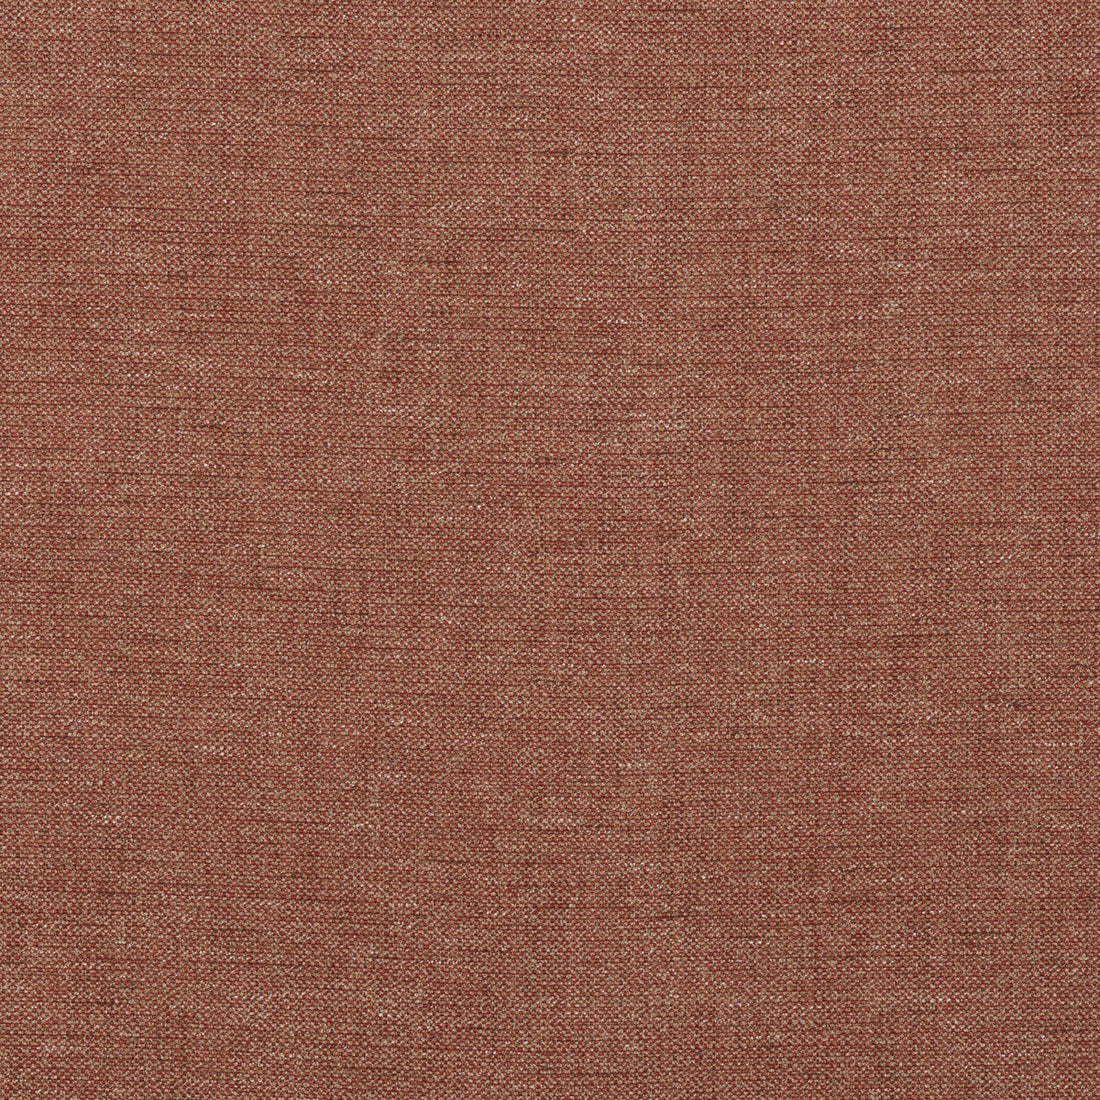 Pentridge fabric in tomato color - pattern BF10956.450.0 - by G P &amp; J Baker in the Baker House Textures collection